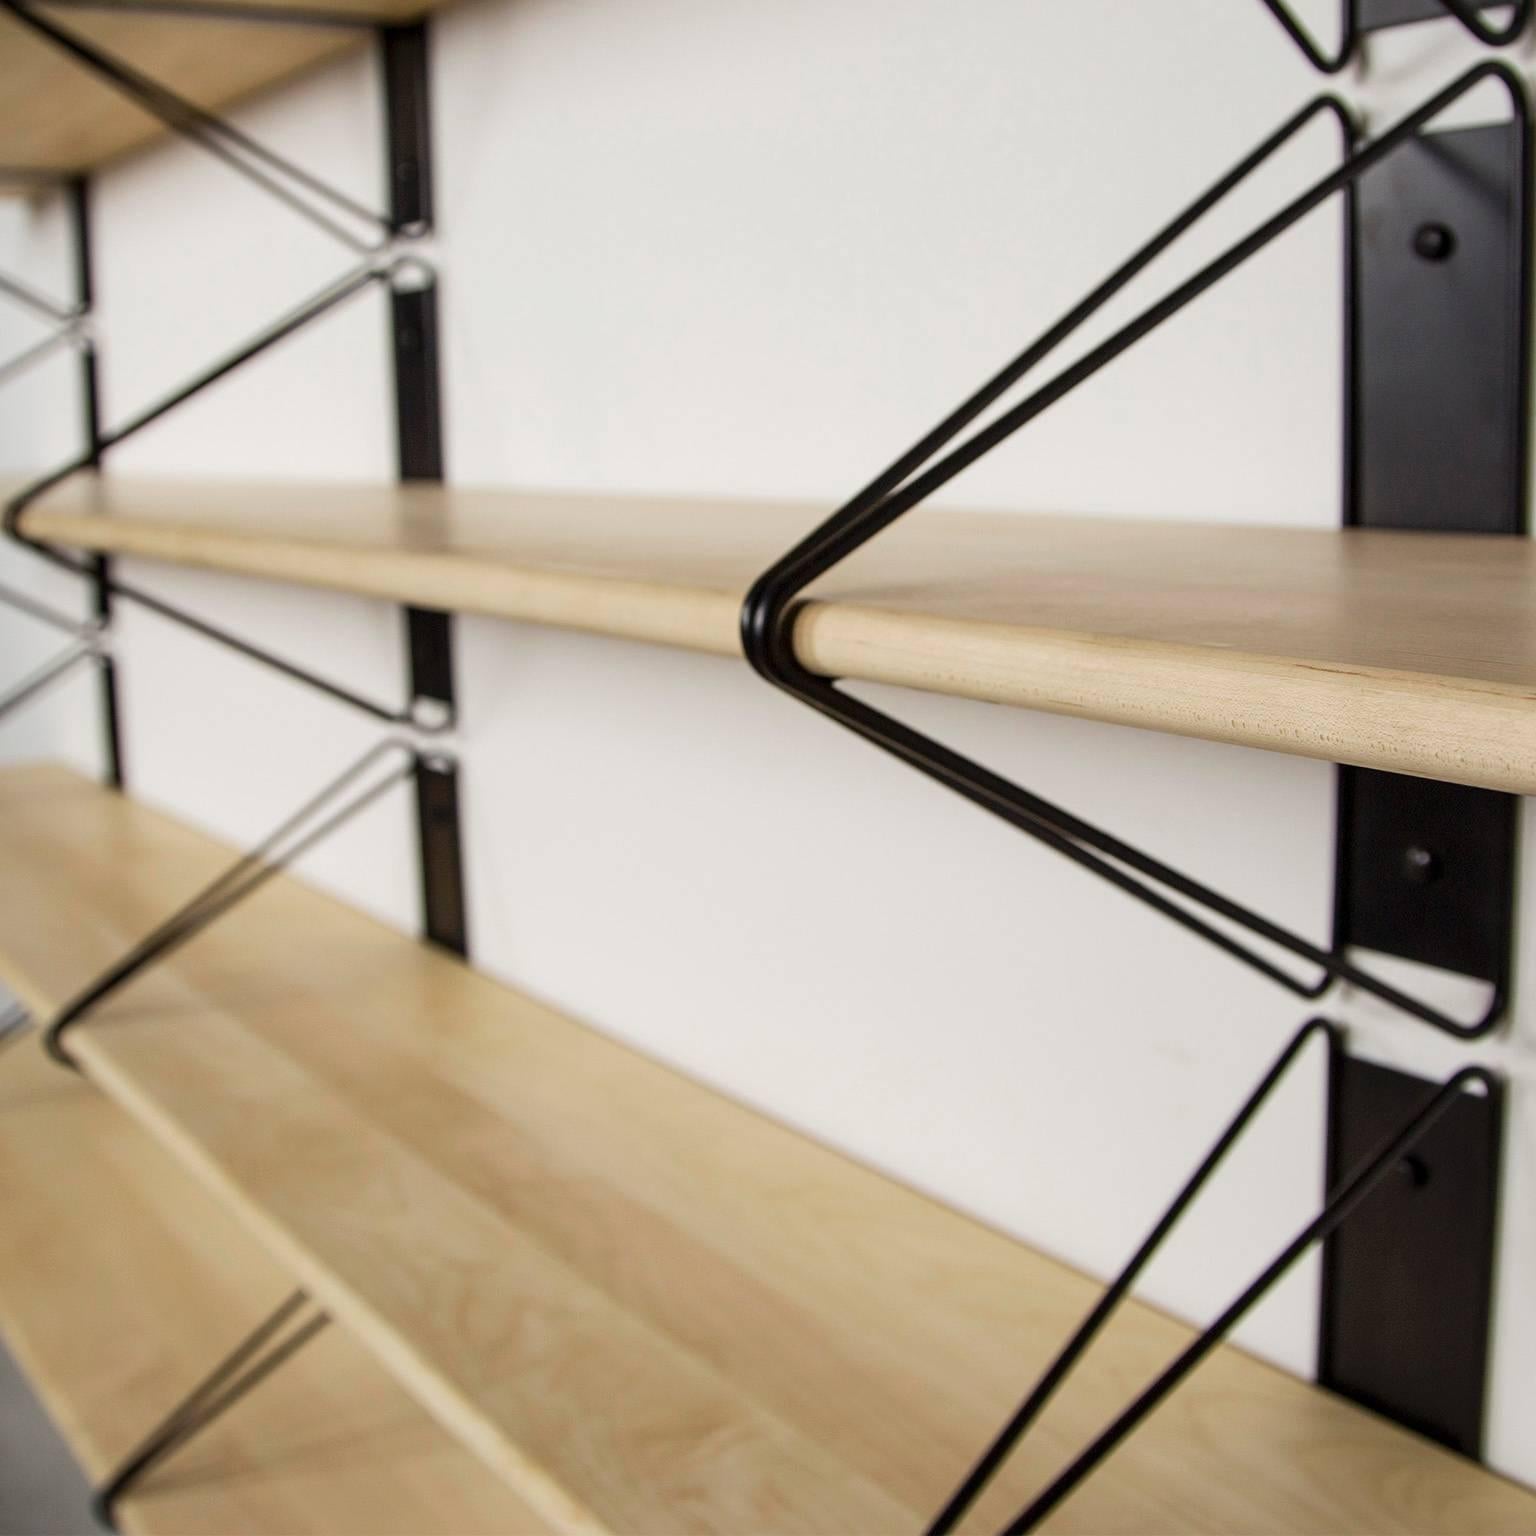 Contemporary Set of 3 Strut Shelves from Souda, 84in, Black and Maple, Made to Order For Sale